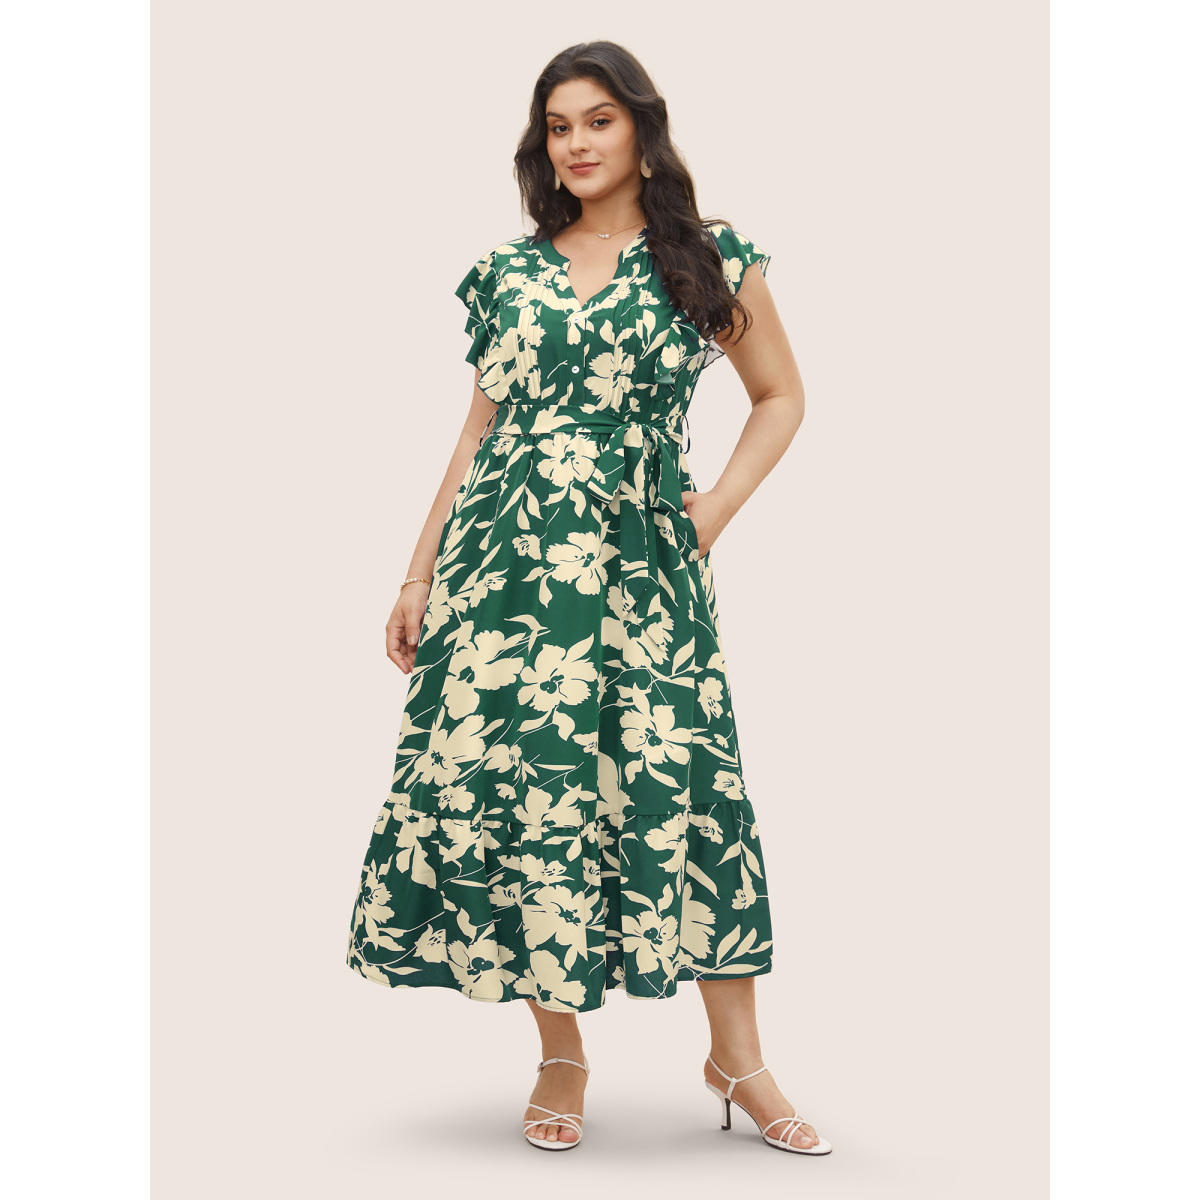 

Plus Size Silhouette Floral Print Ruffle Cap Sleeve Dress Emerald Women Belted Notched collar Cap Sleeve Curvy Midi Dress BloomChic